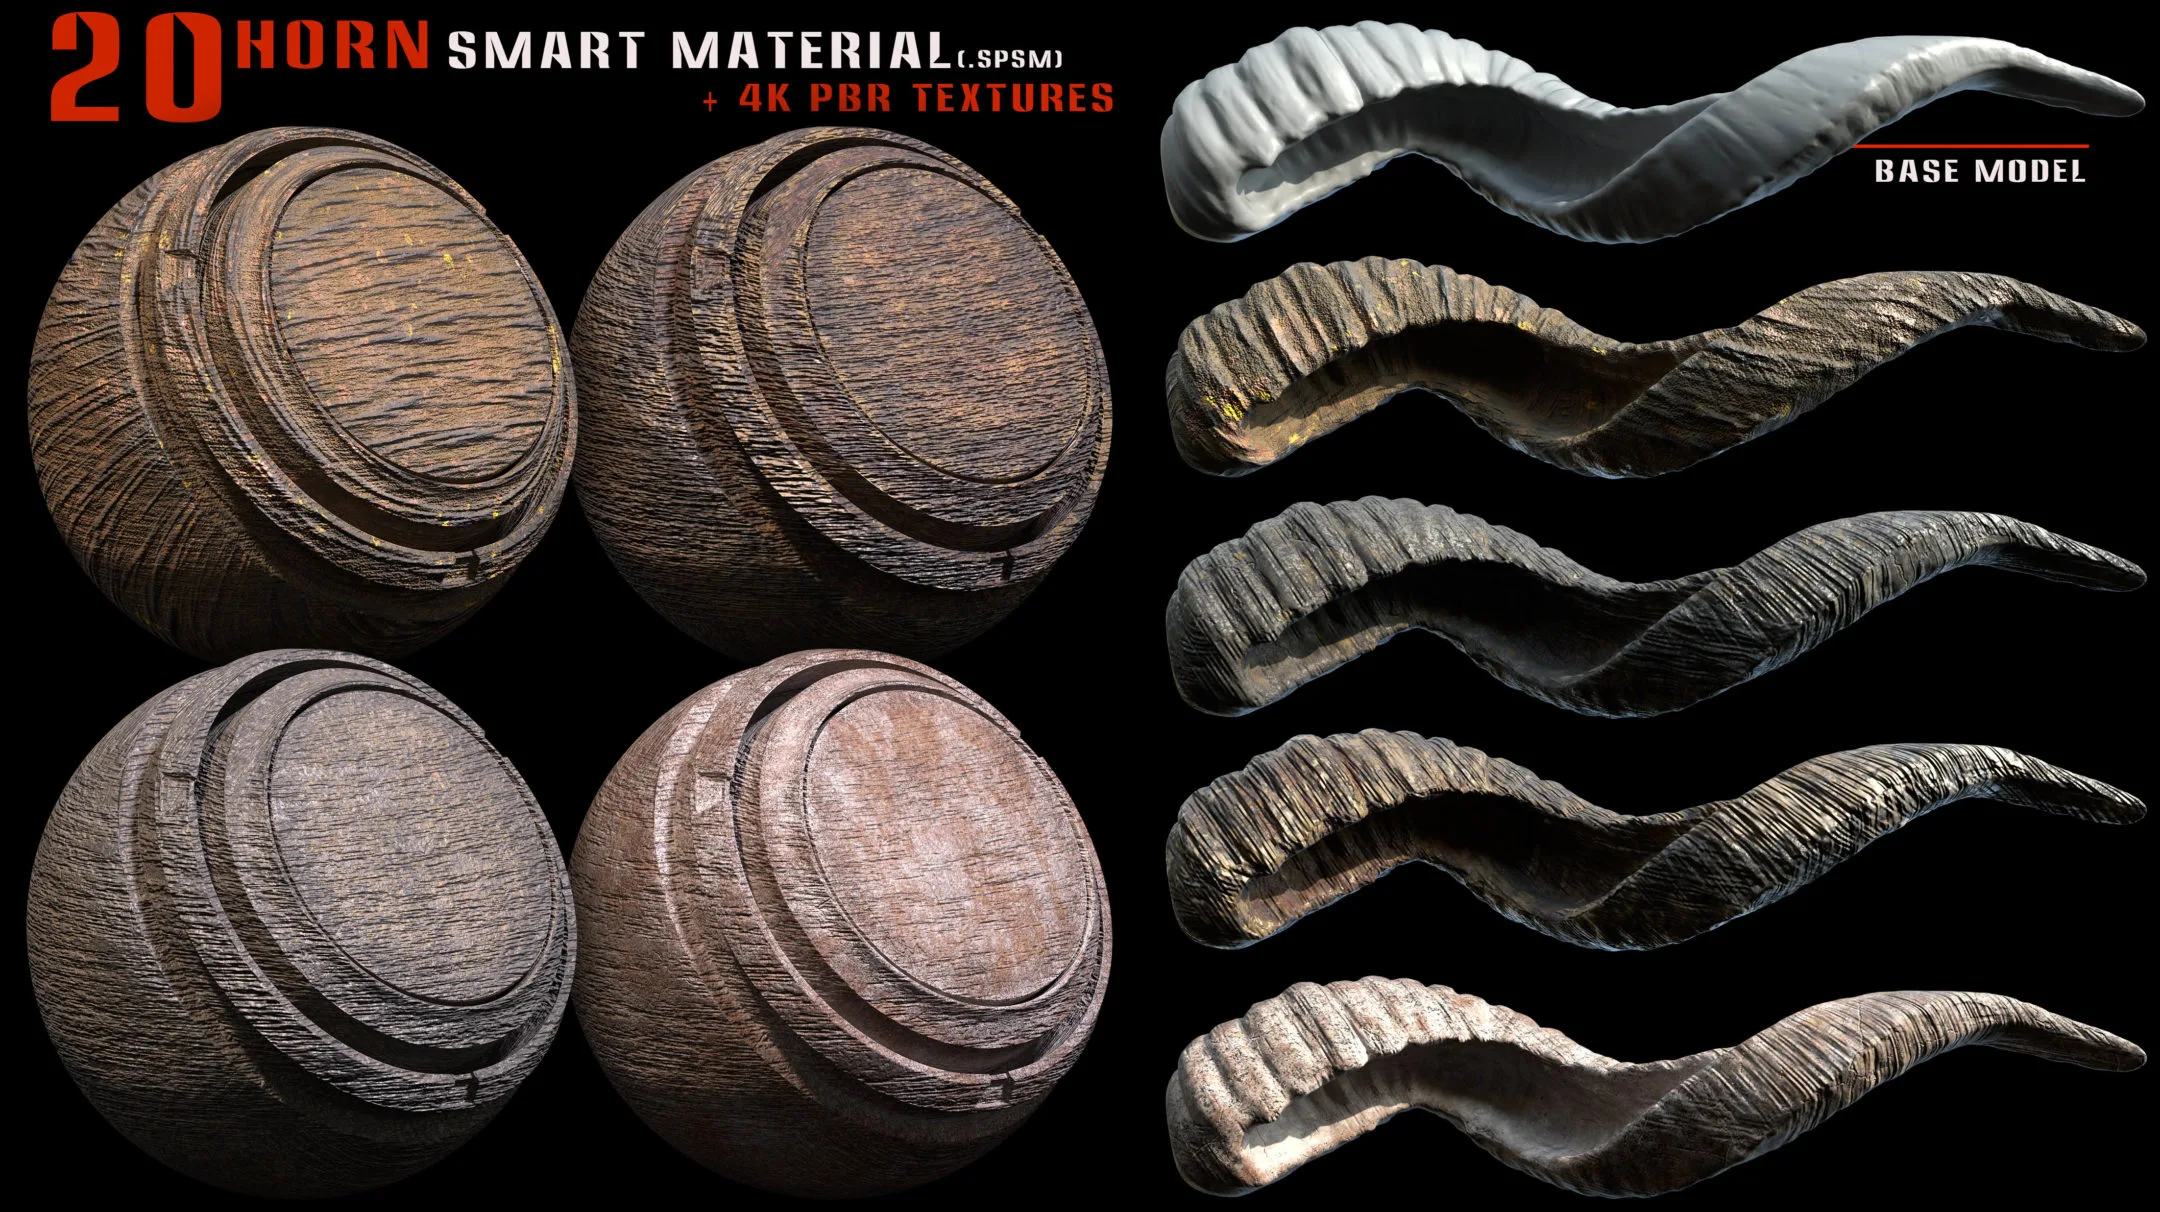 20 Horn smart material and 4k PBR textures - Vol 9